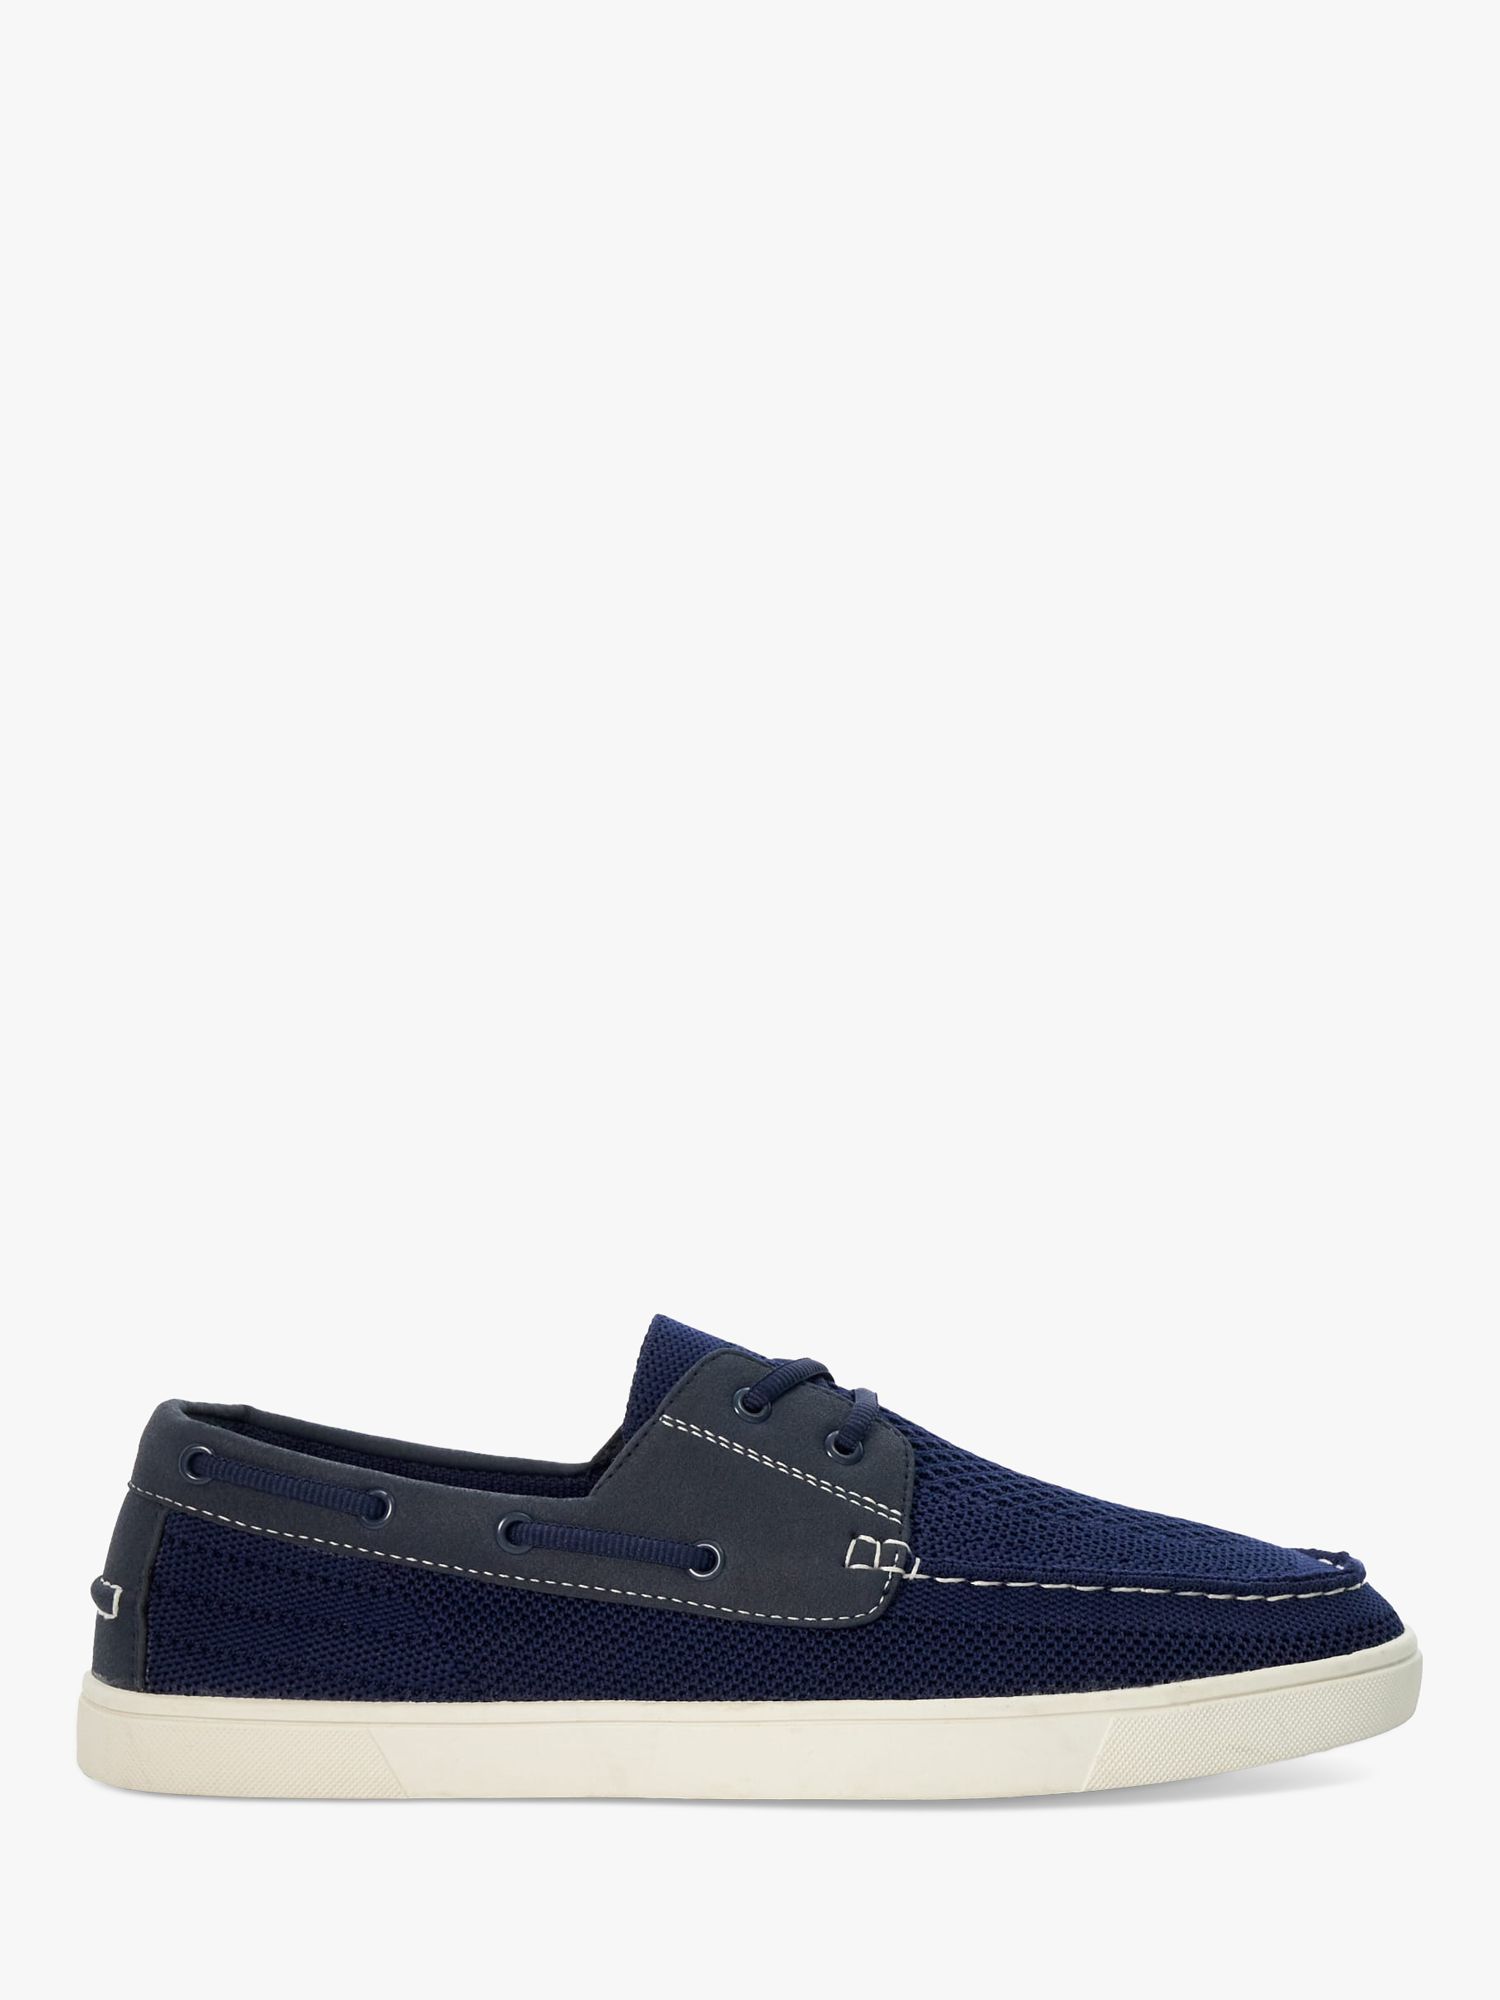 Buy Dune Blaizerss Knit Boat Shoes, Navy Online at johnlewis.com